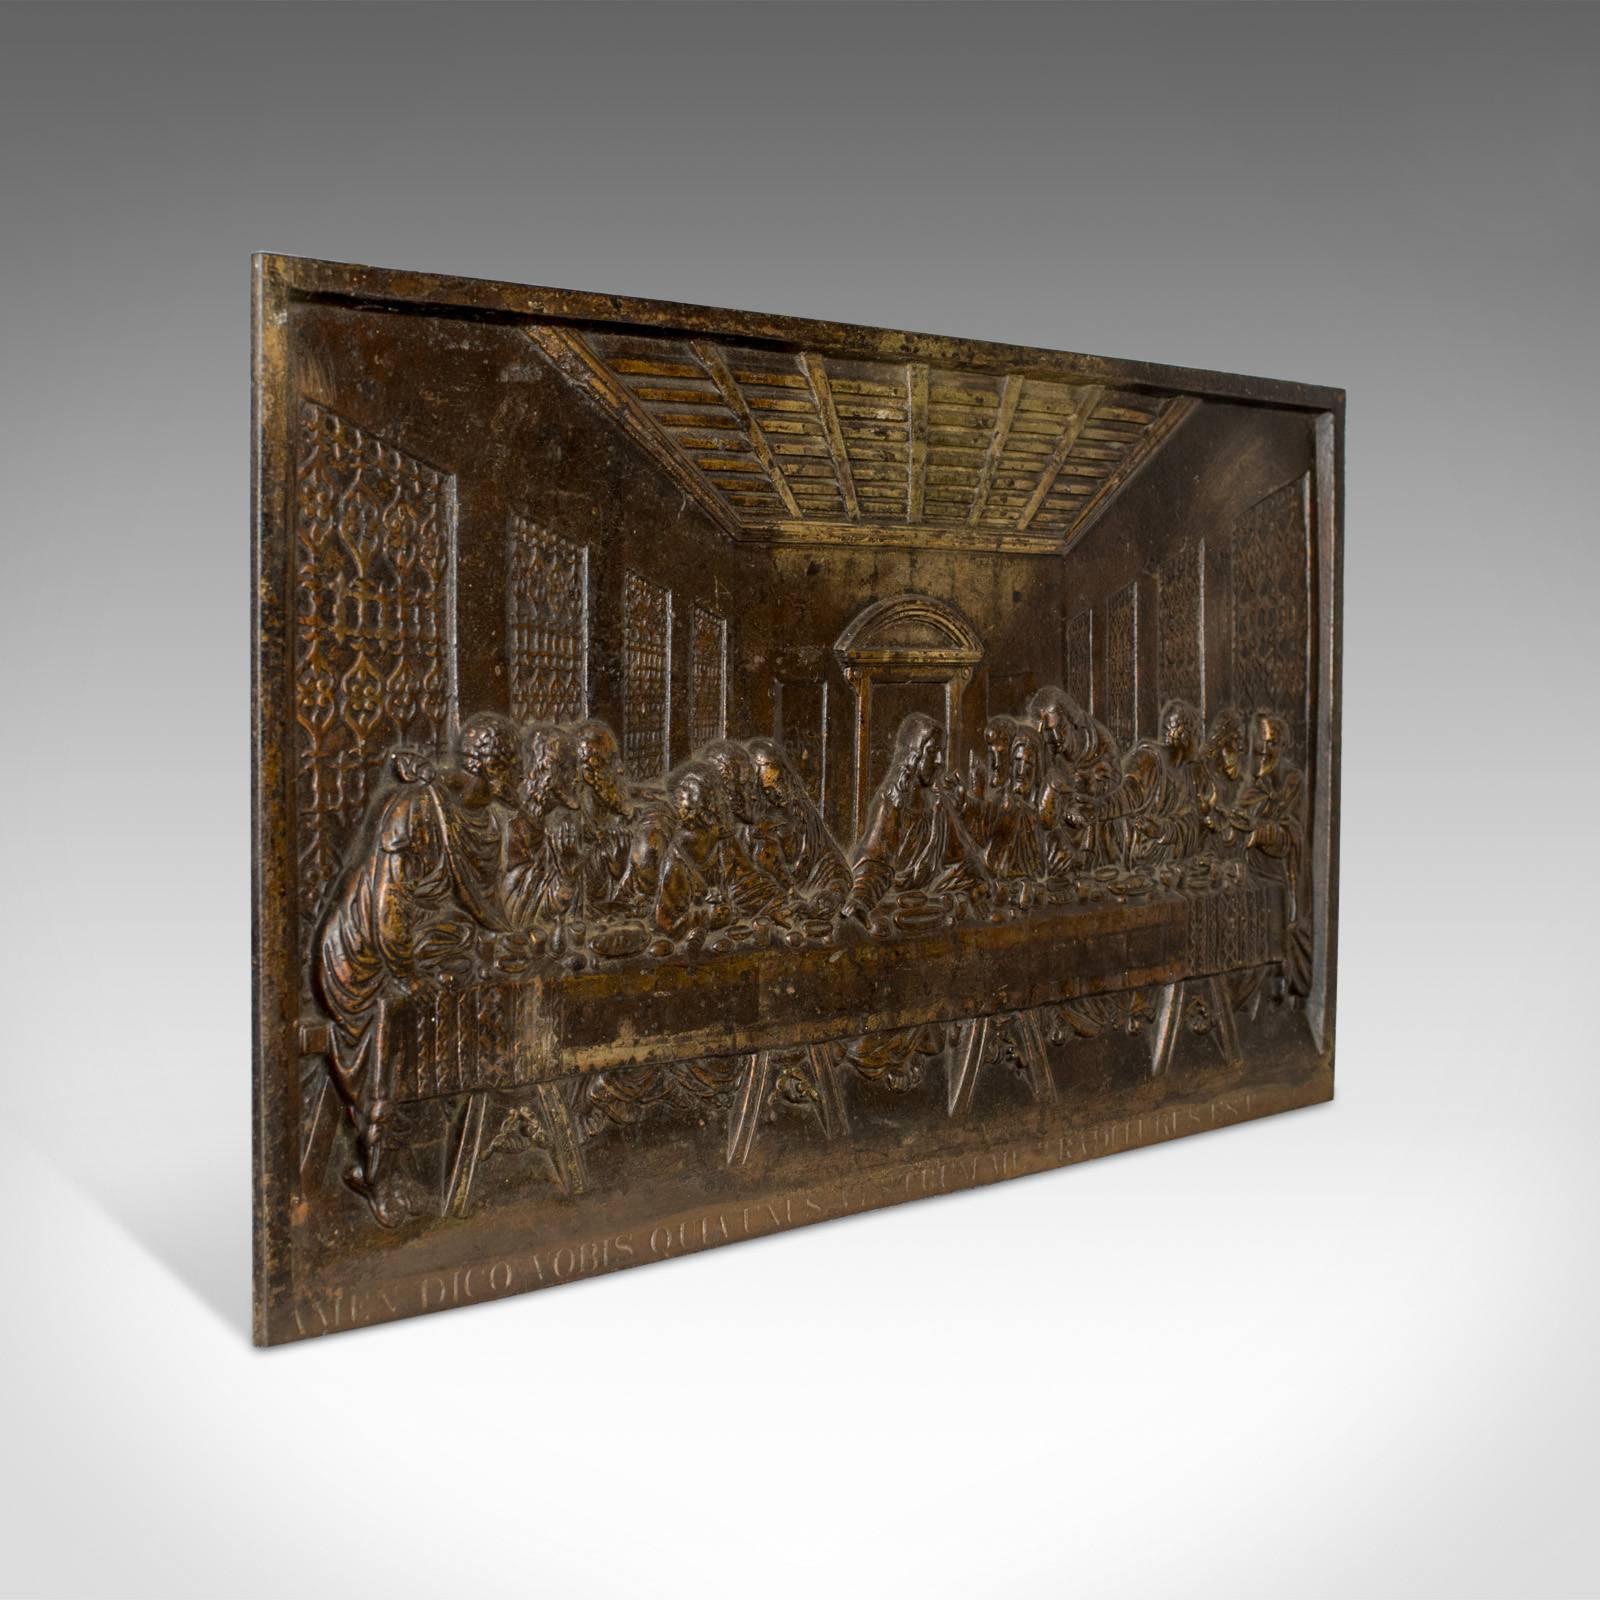 This is an antique bronzed iron plaque depicting the Renaissance master, Leonardo Da Vinci's 'The Last Supper'. An English fireback or wall decoration dating to the late Victorian period, circa 1890.

Astonishing detail for an iron cast
Bronzed